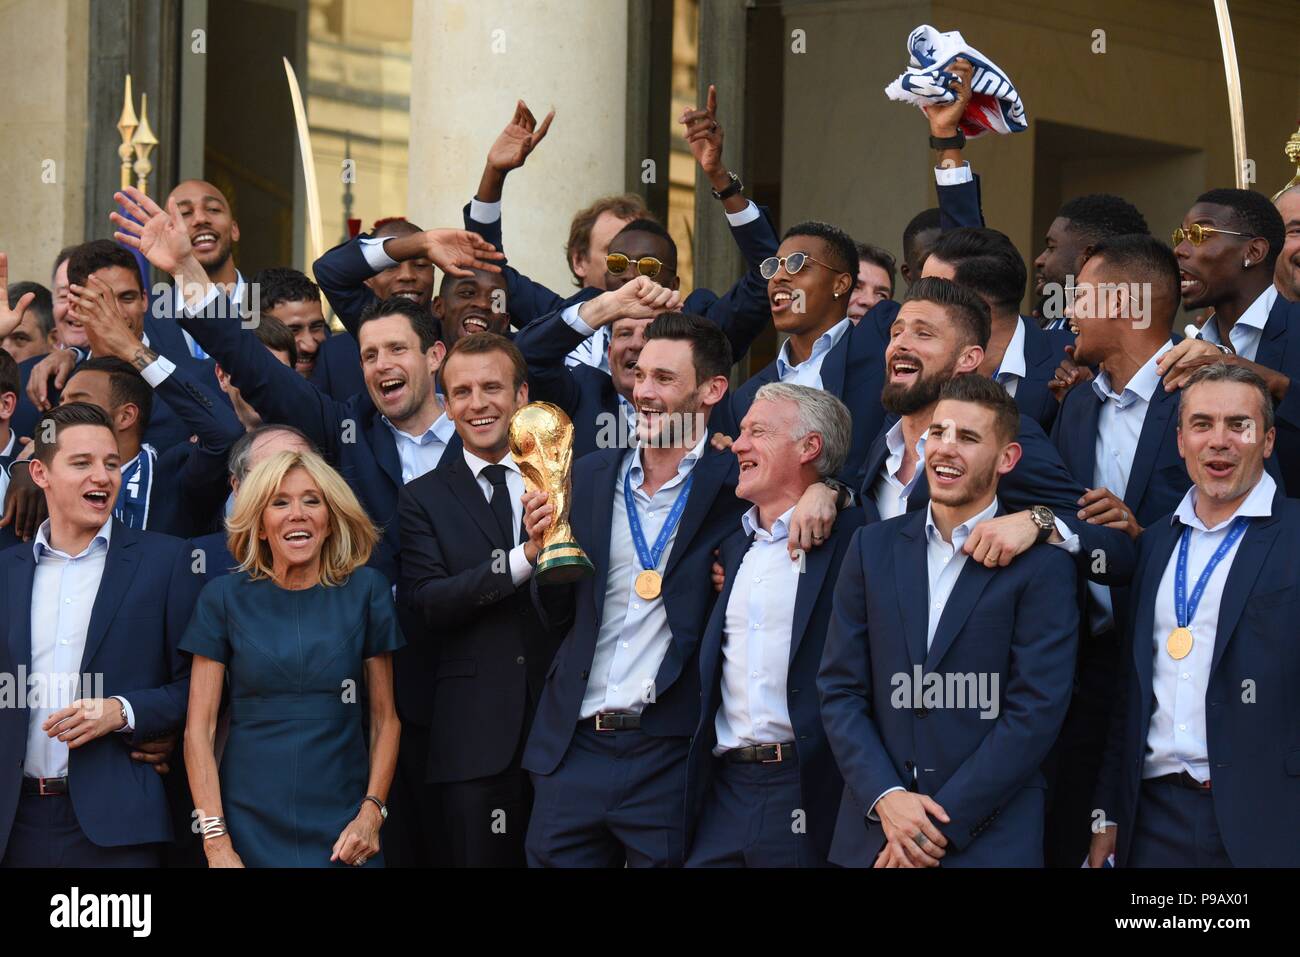 Paris, France. 16th July 2018. French President Emmanuel Macron and his  wife Brigitte Macron welcome the French football team at the presidential  Elysee palace in the wake of its World Cup victory.